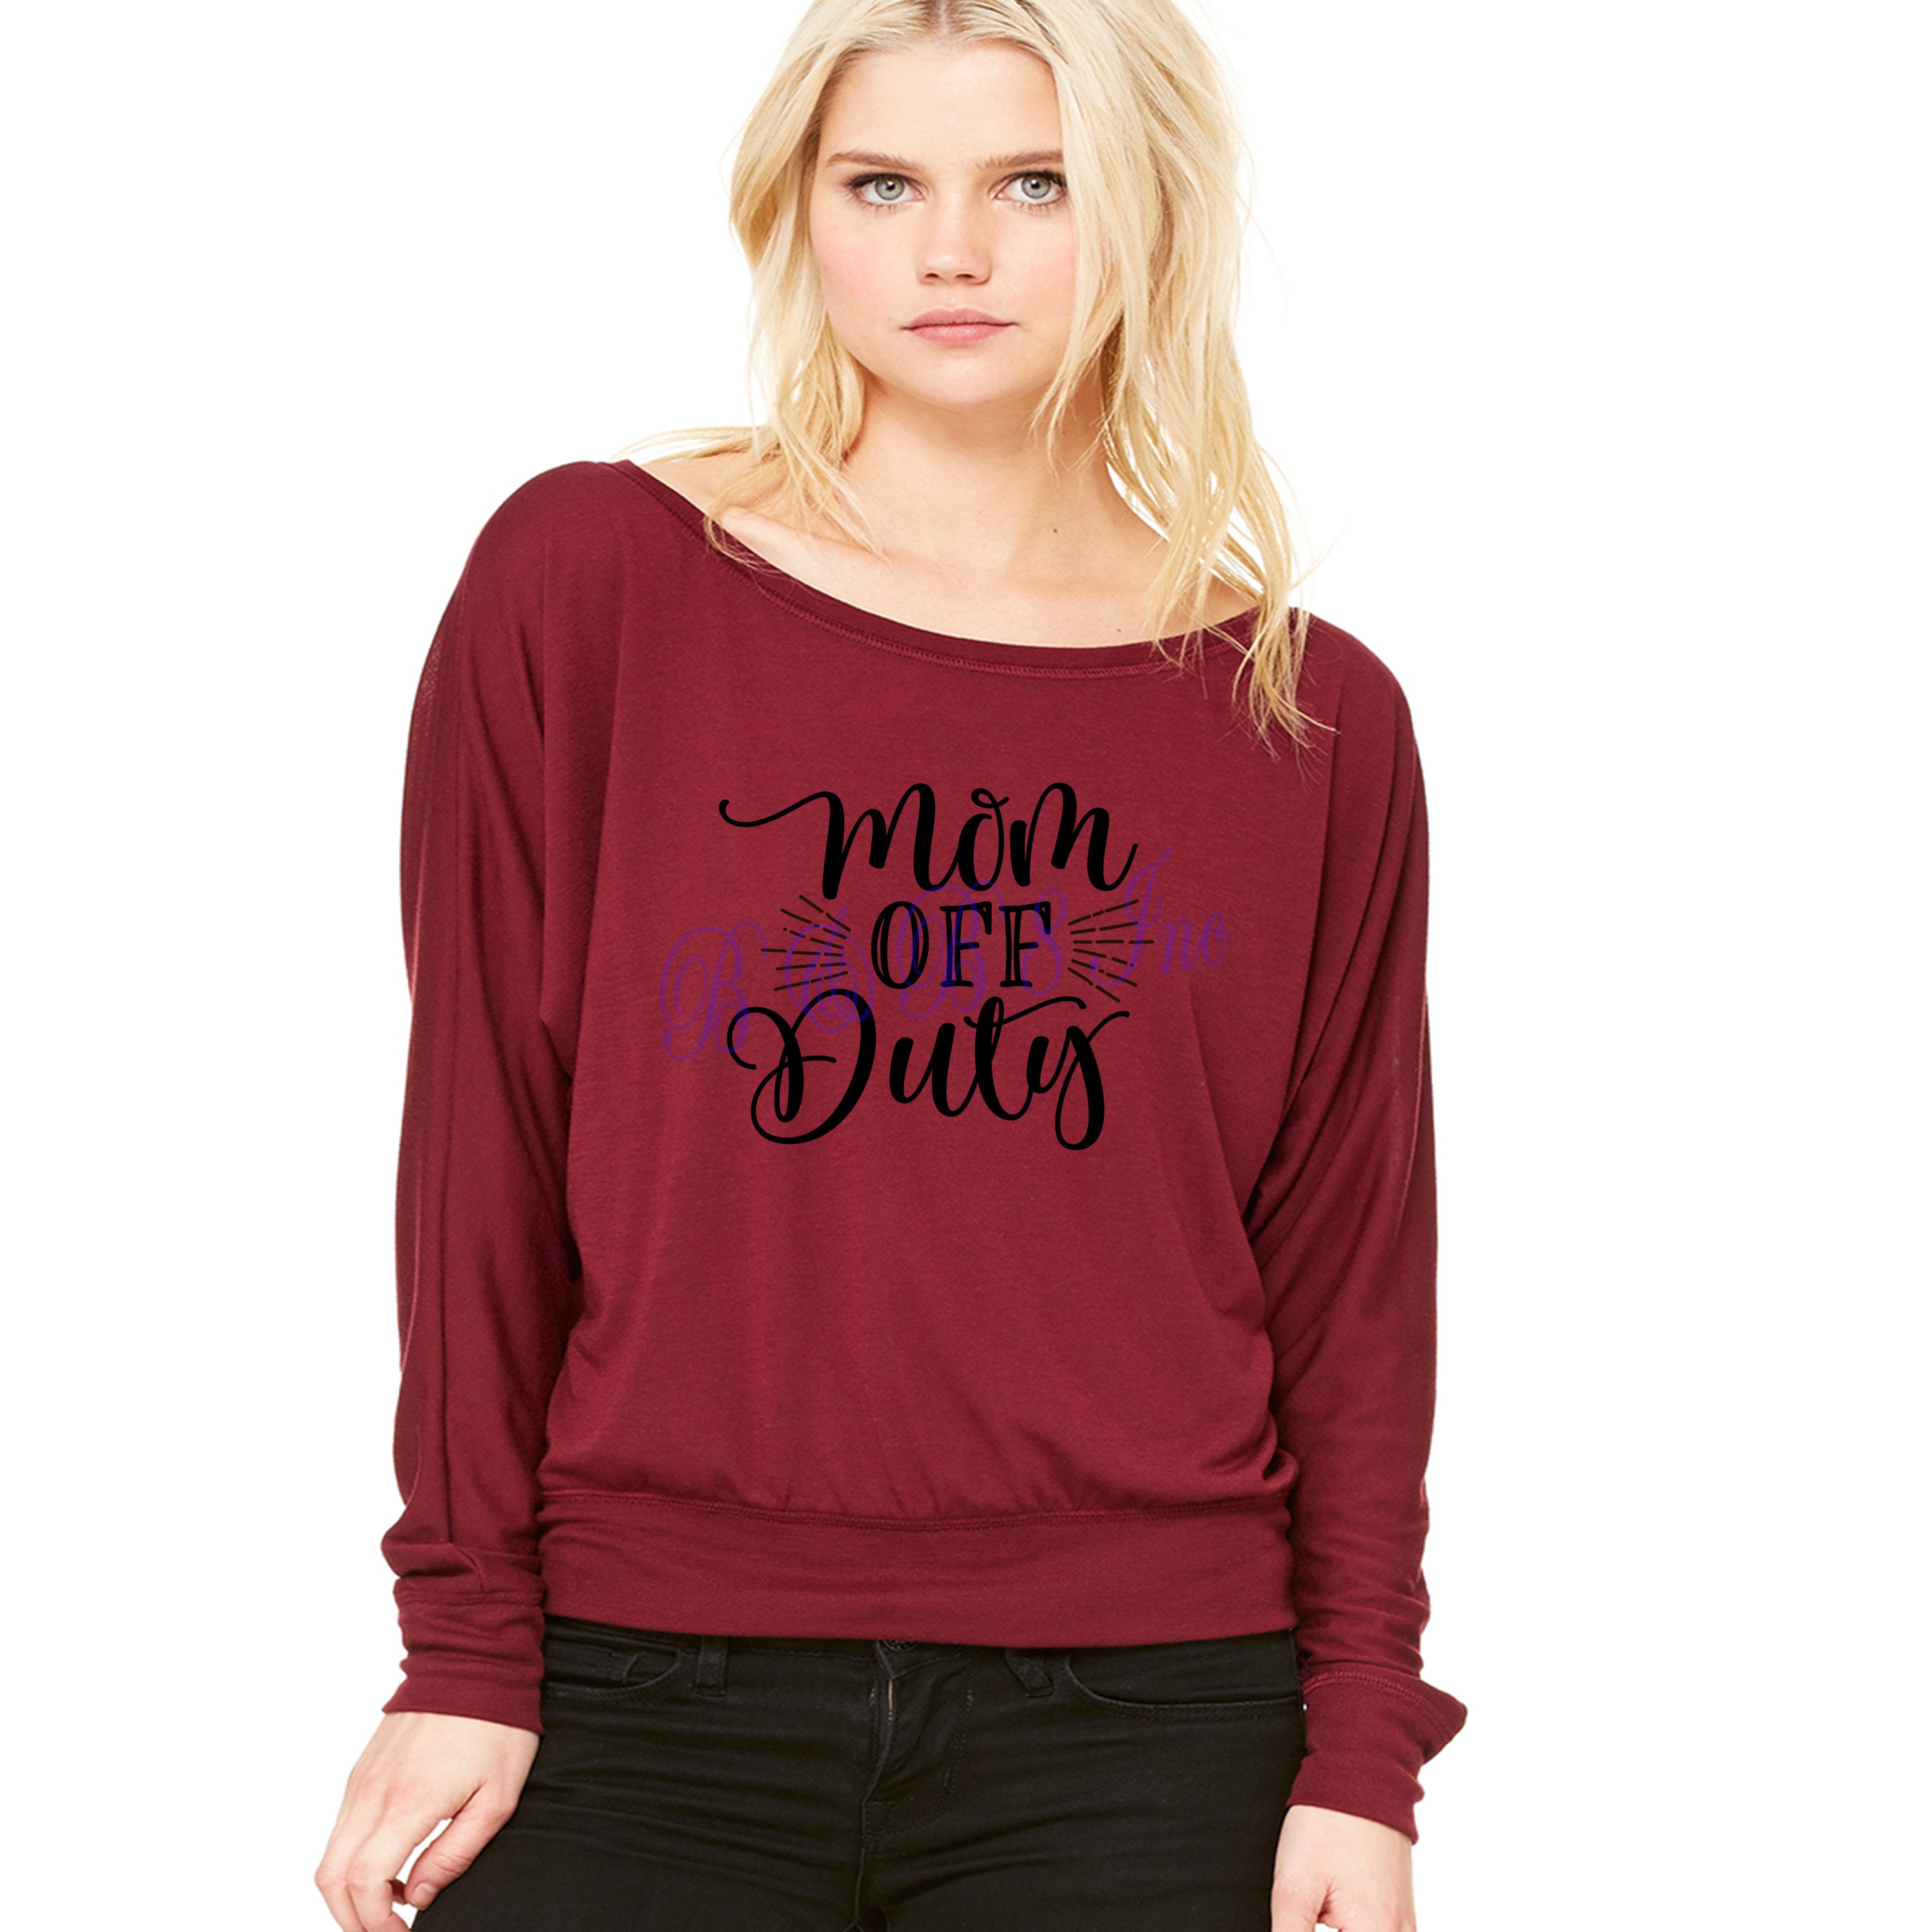 Mom off Duty Shirt, #Momlife, Mother's Day Gift, Mother's Day, Momlife, Gift for Mom, Mommin Aint easy